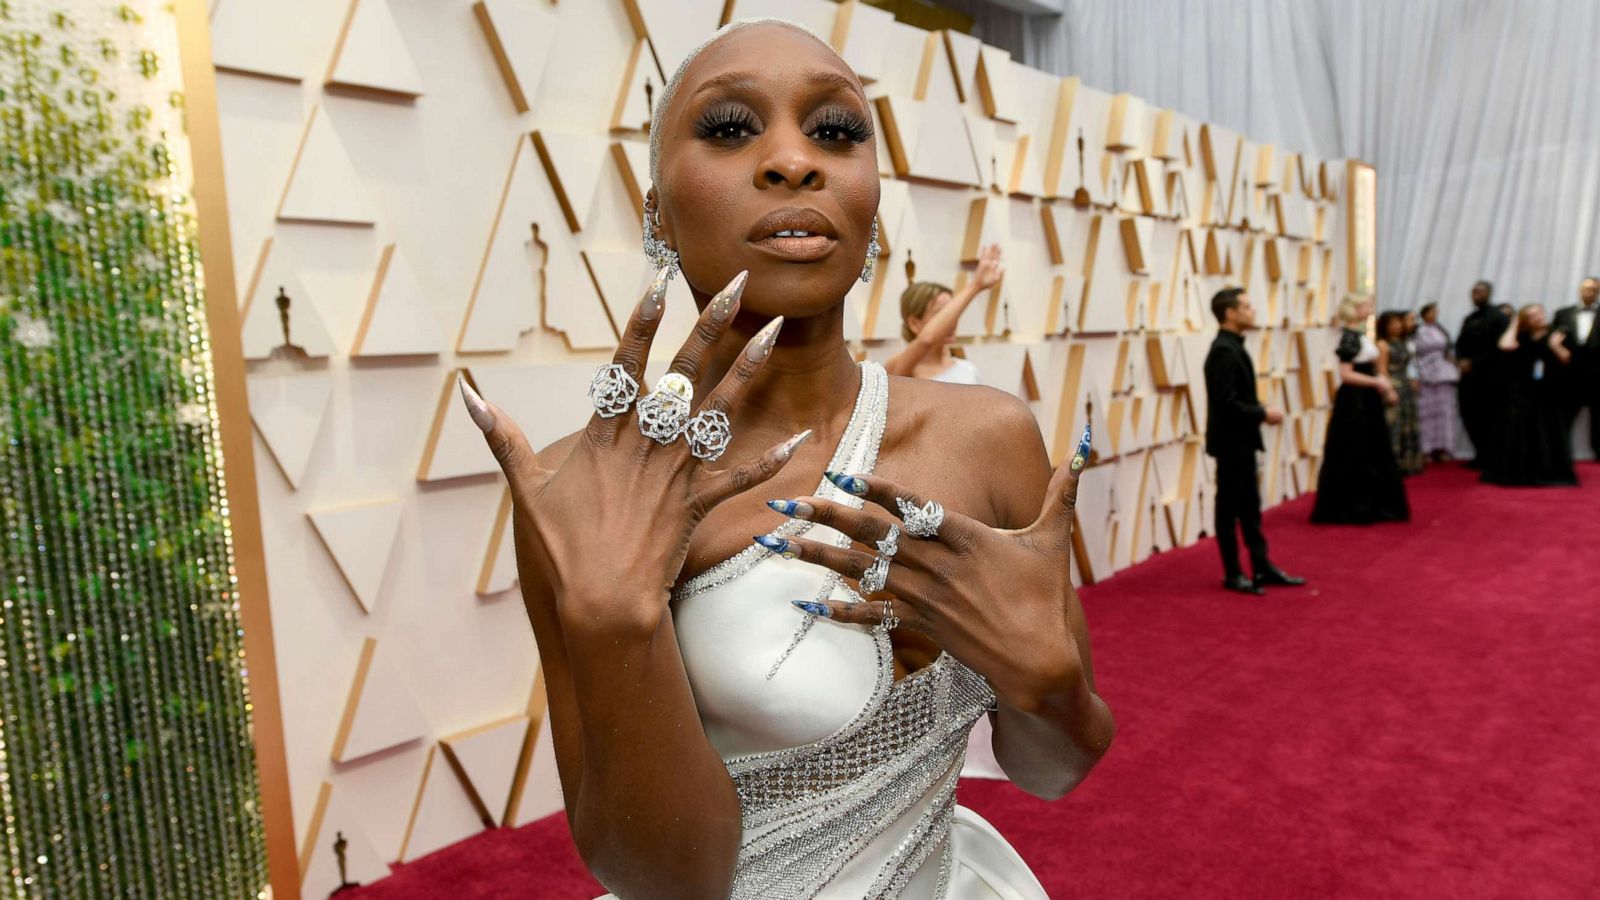 Oscars: 9 Glamorous Necklaces for the Red Carpet, From Chopard to